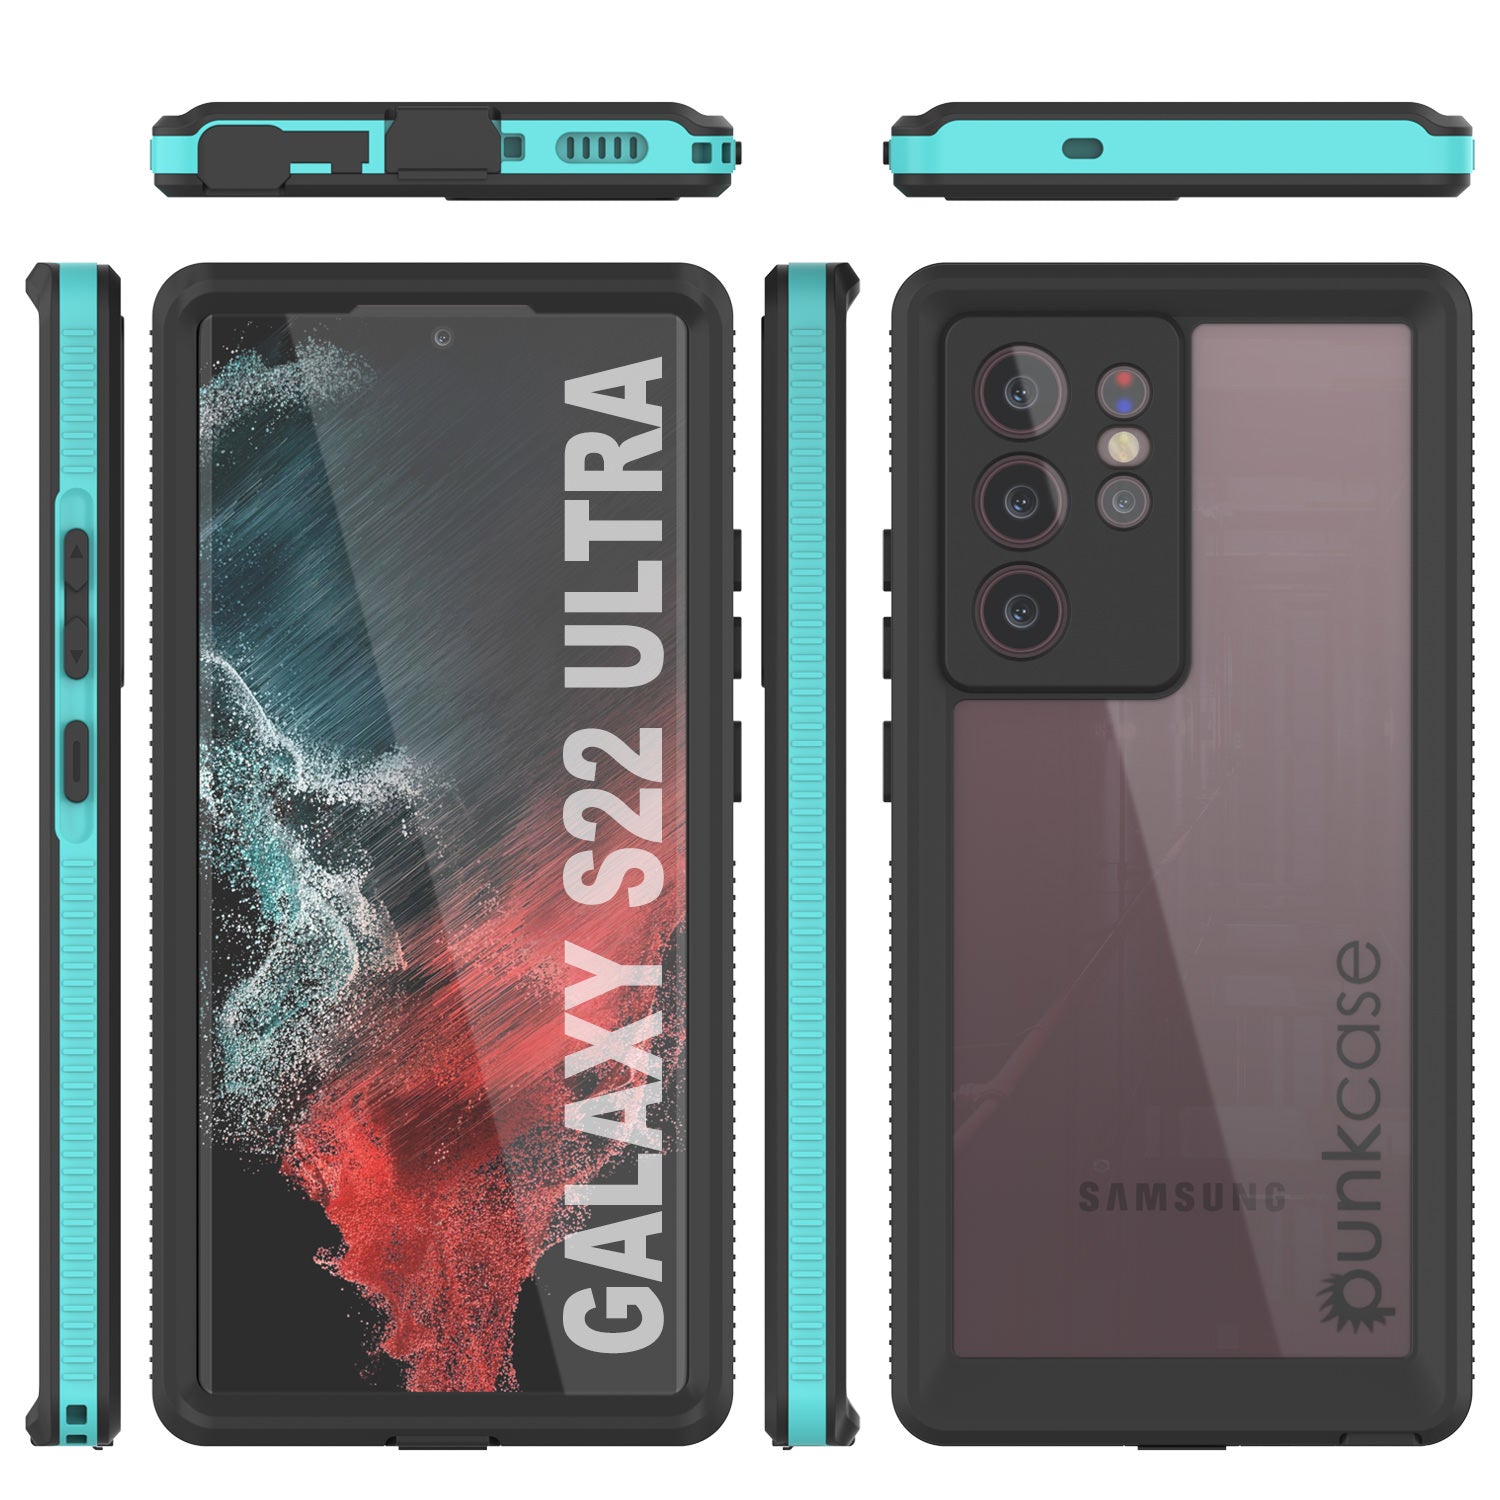 Galaxy S22 Ultra Waterproof Case PunkCase Ultimato Teal Thin 6.6ft Underwater IP68 Shock/Snow Proof [Teal]